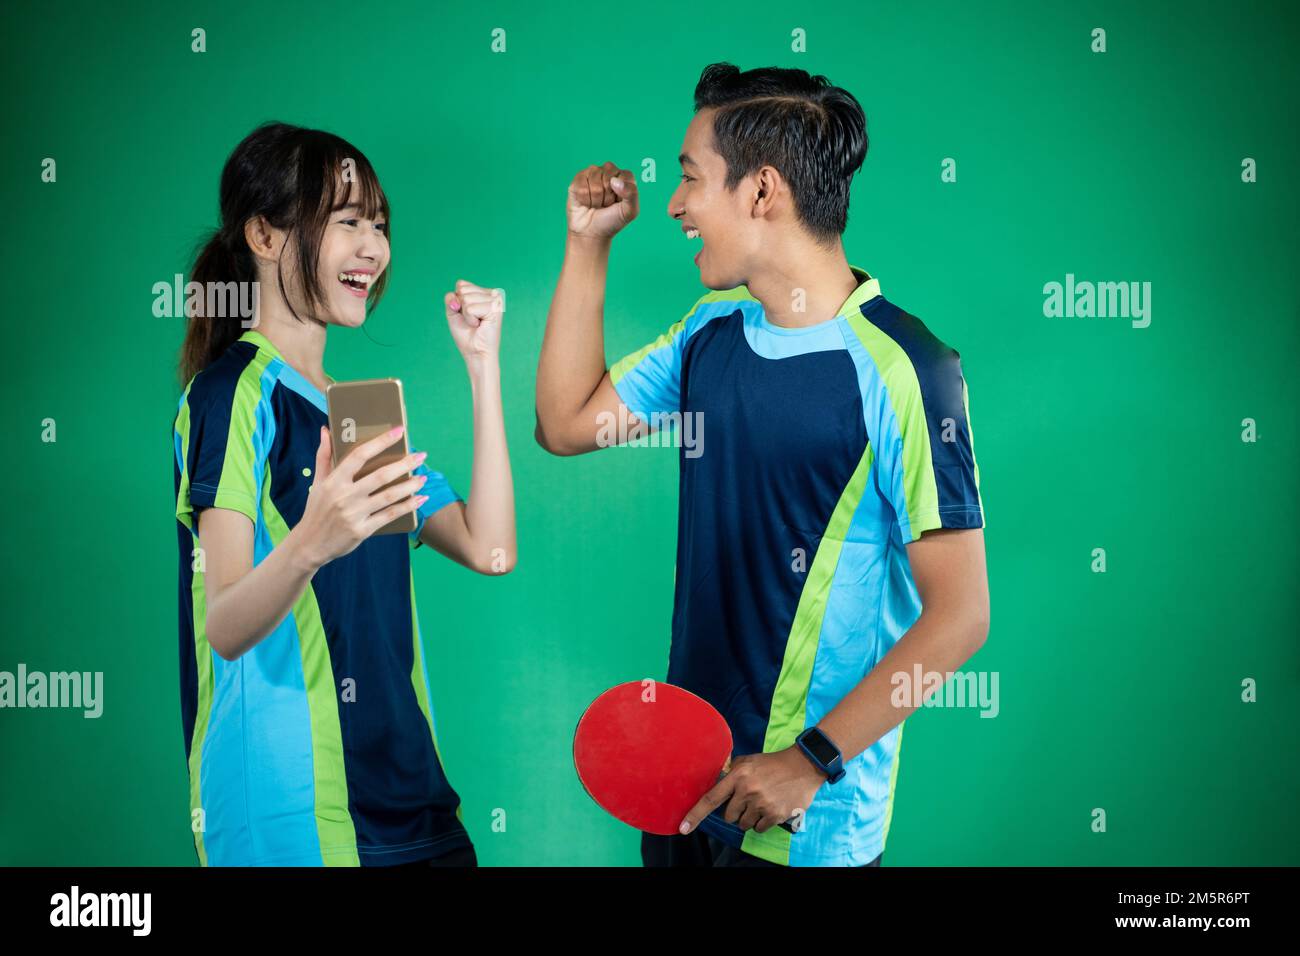 female and male athletes looking at smartphones with clenched fists Stock Photo